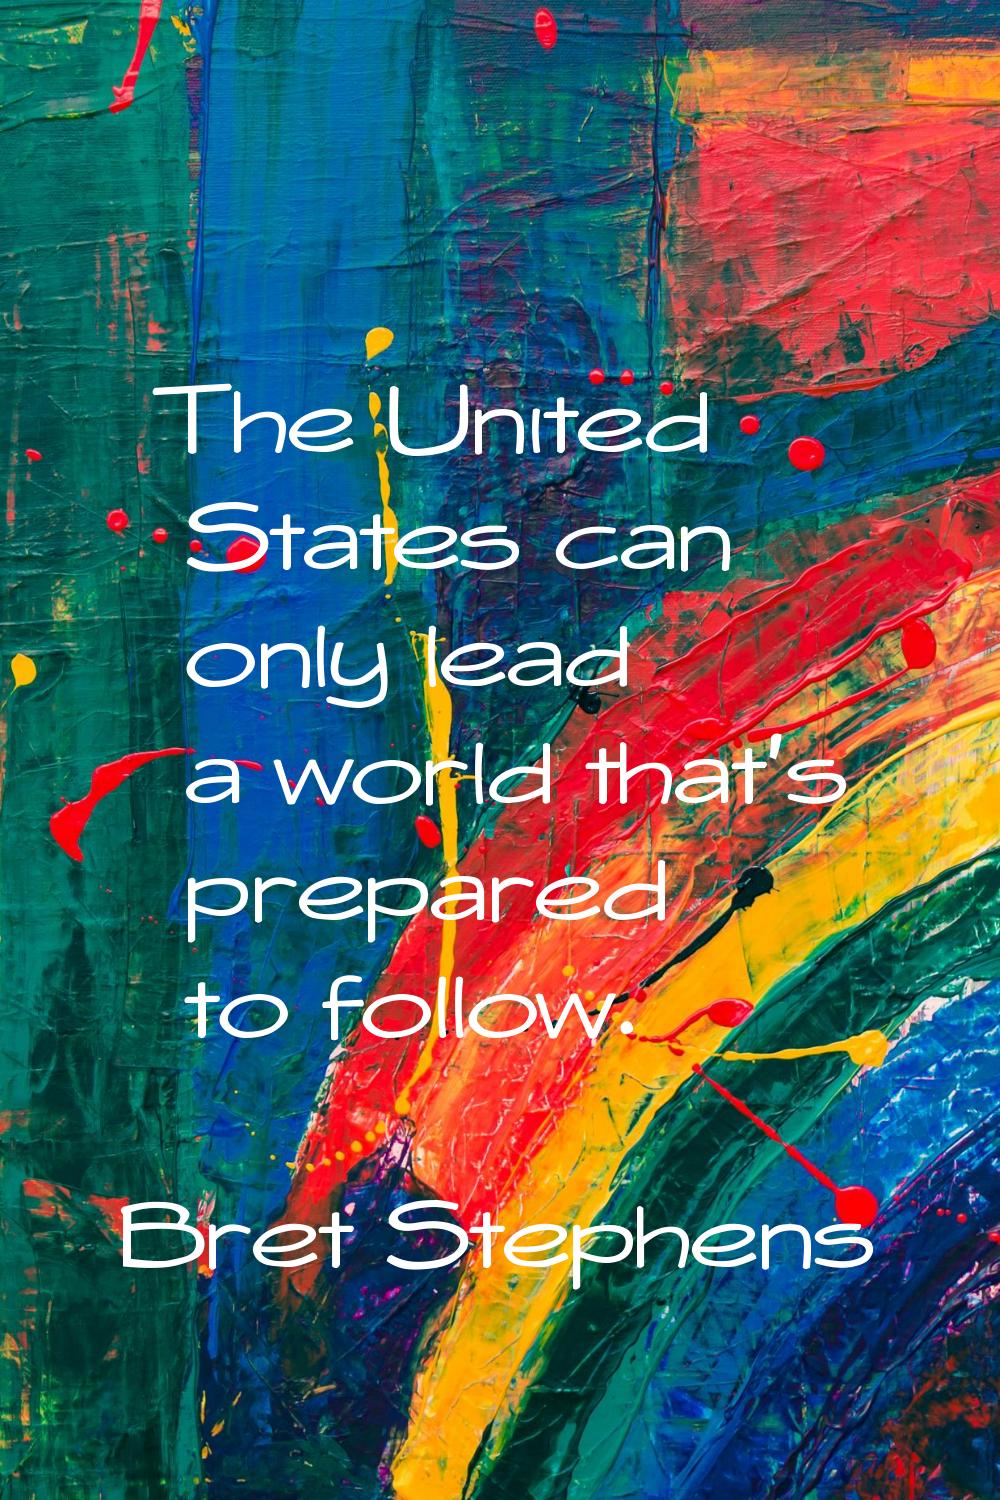 The United States can only lead a world that's prepared to follow.